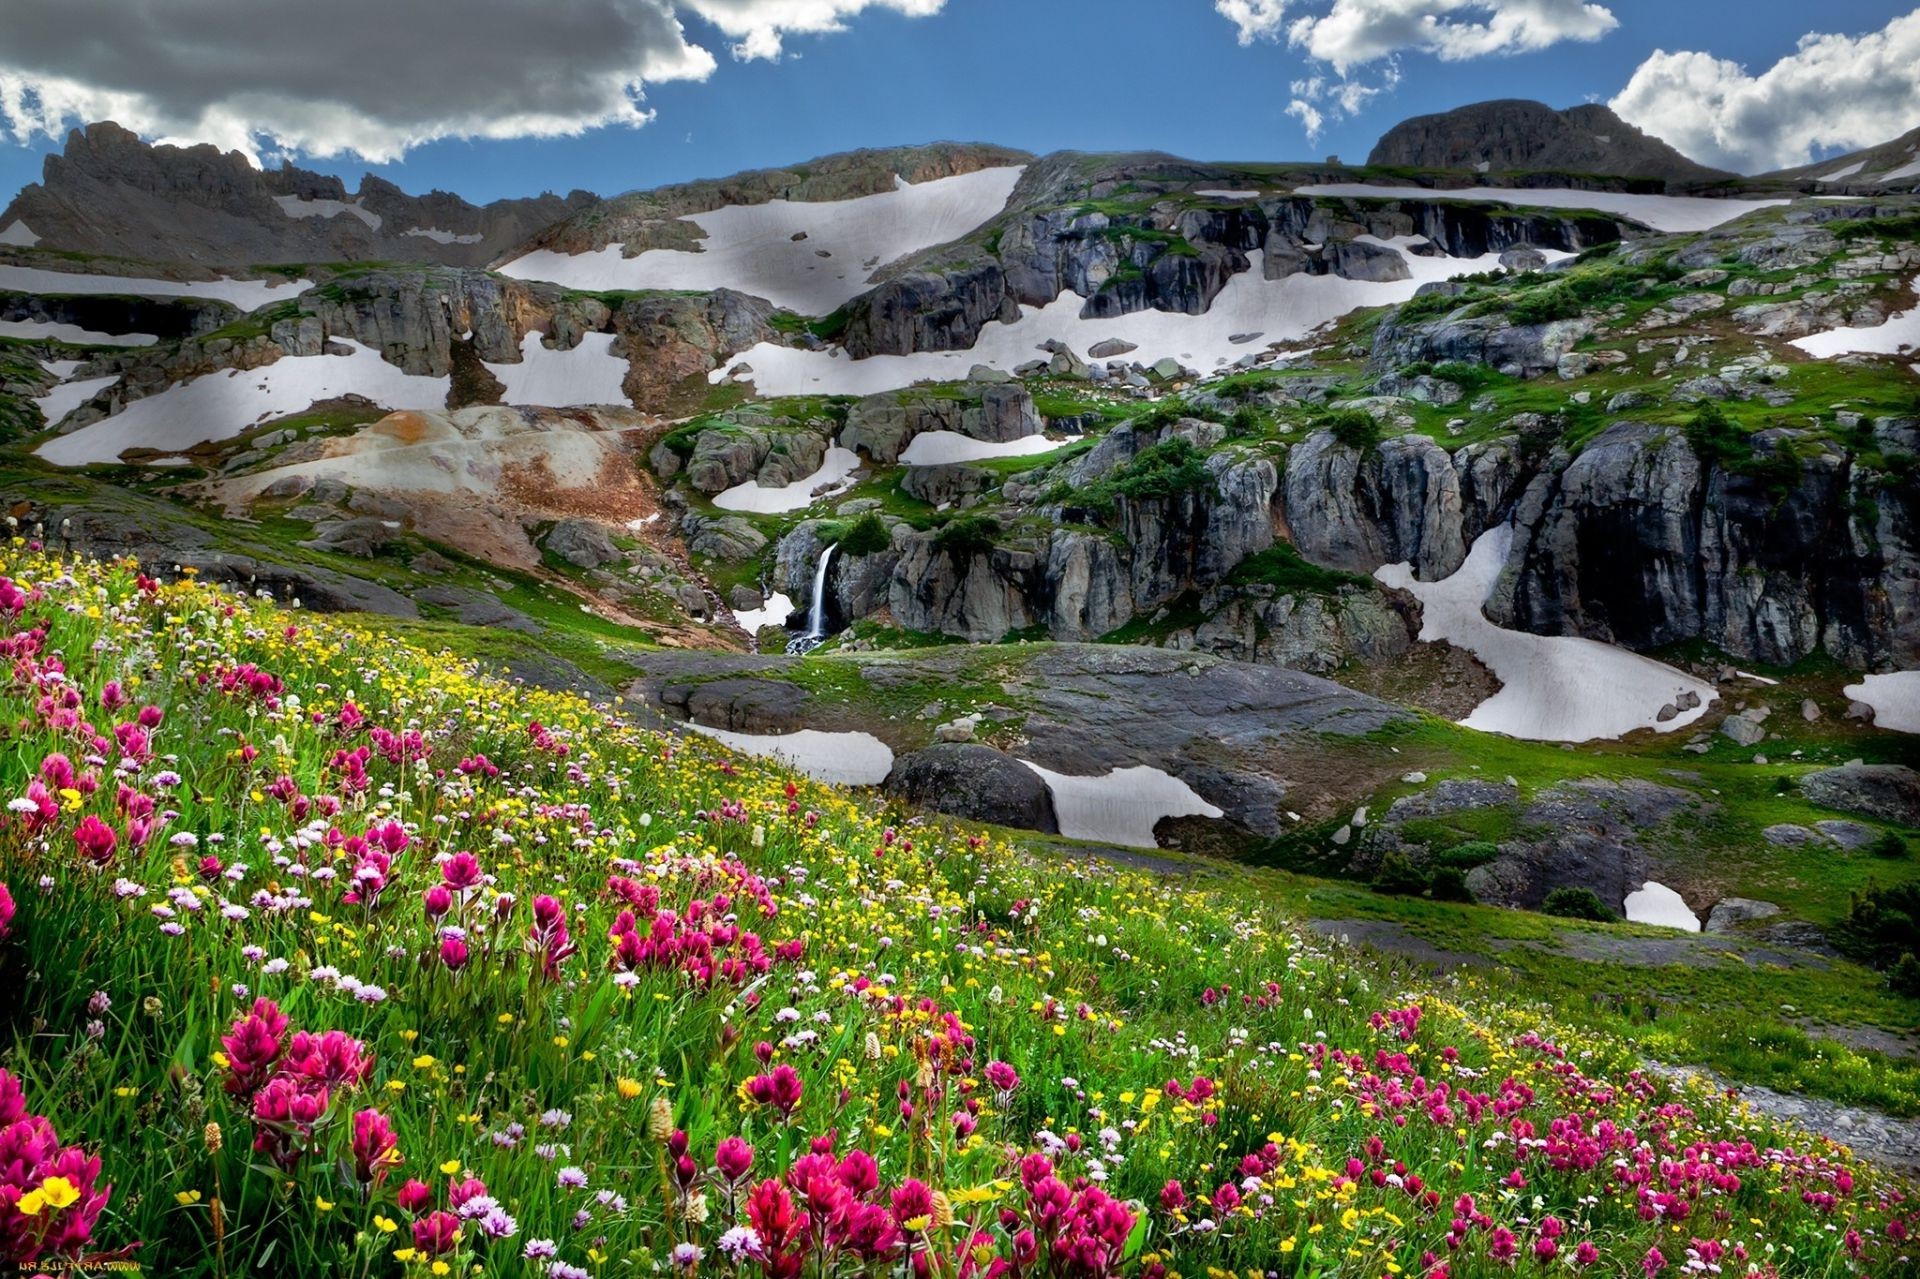 mountains landscape nature flower mountain travel outdoors summer scenic sky water grass sight rock tourism